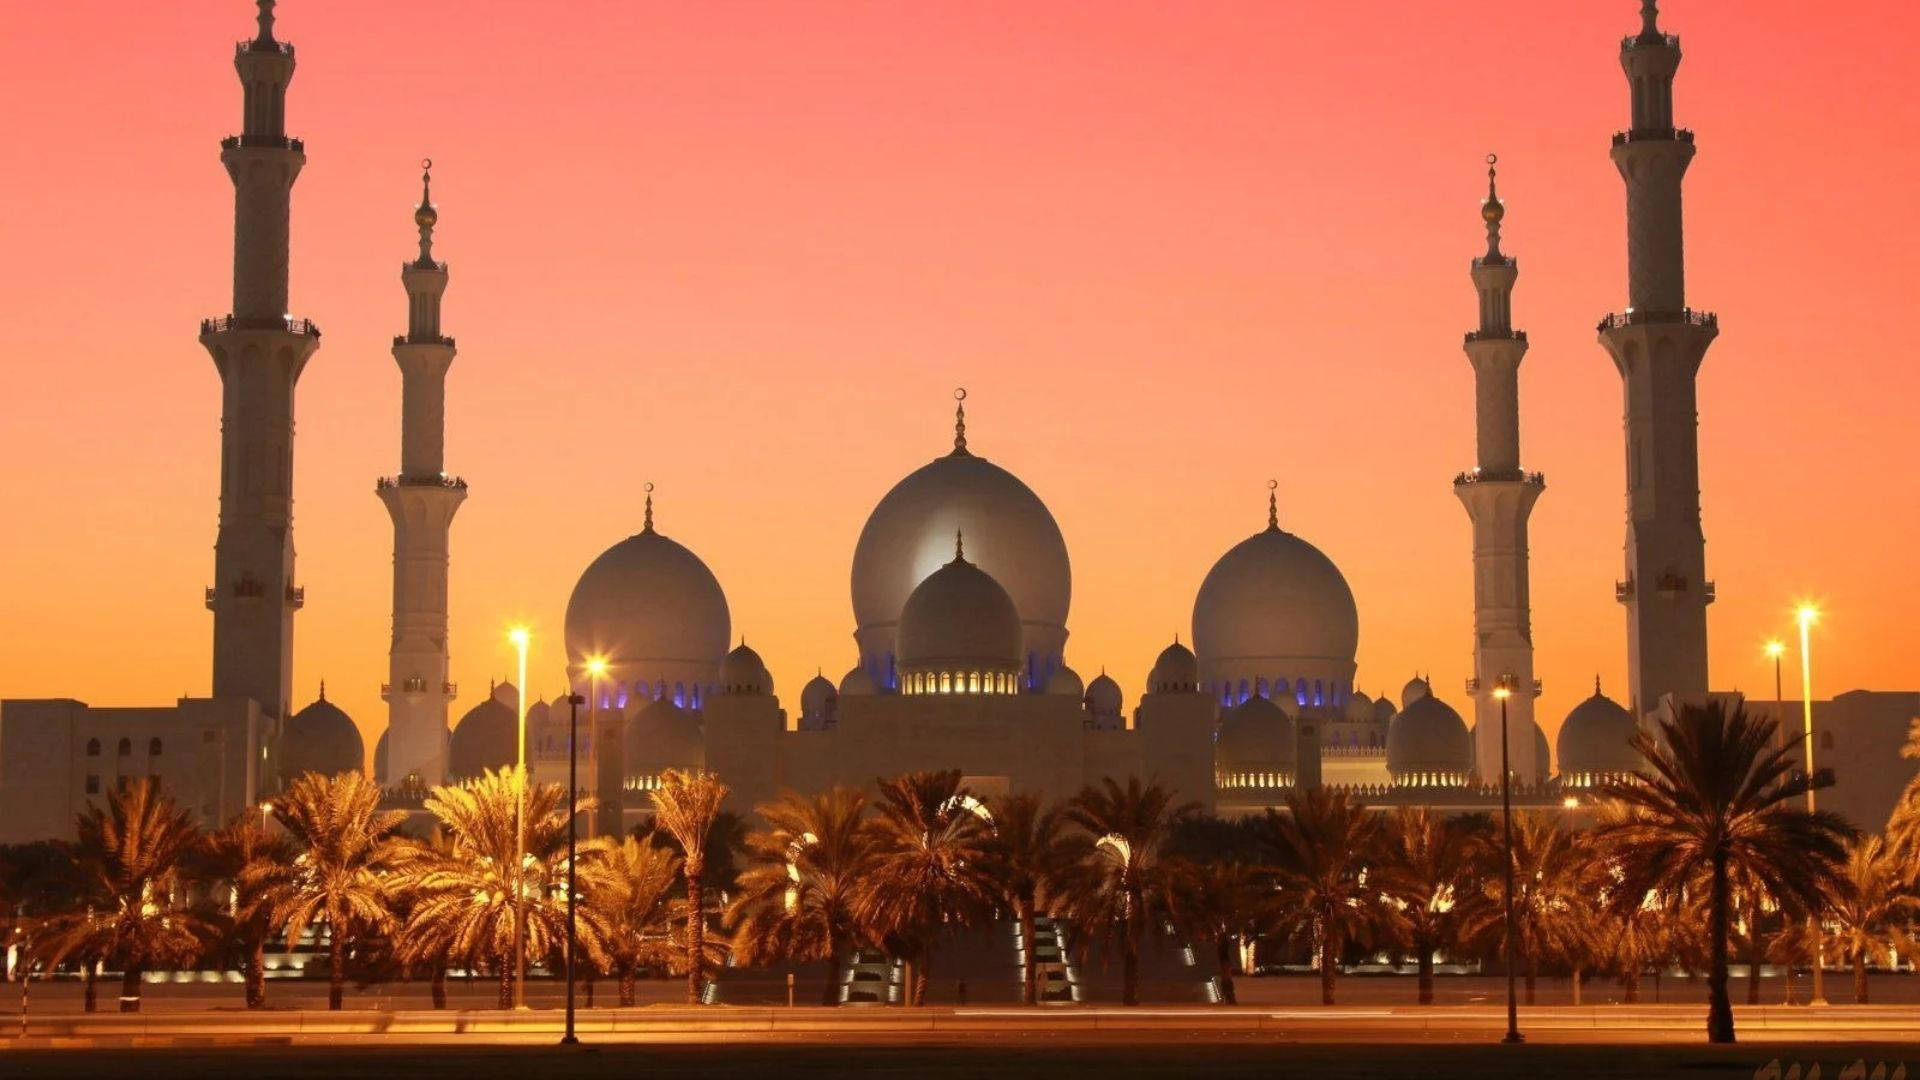 Baghdad Mosque At Sunset Background